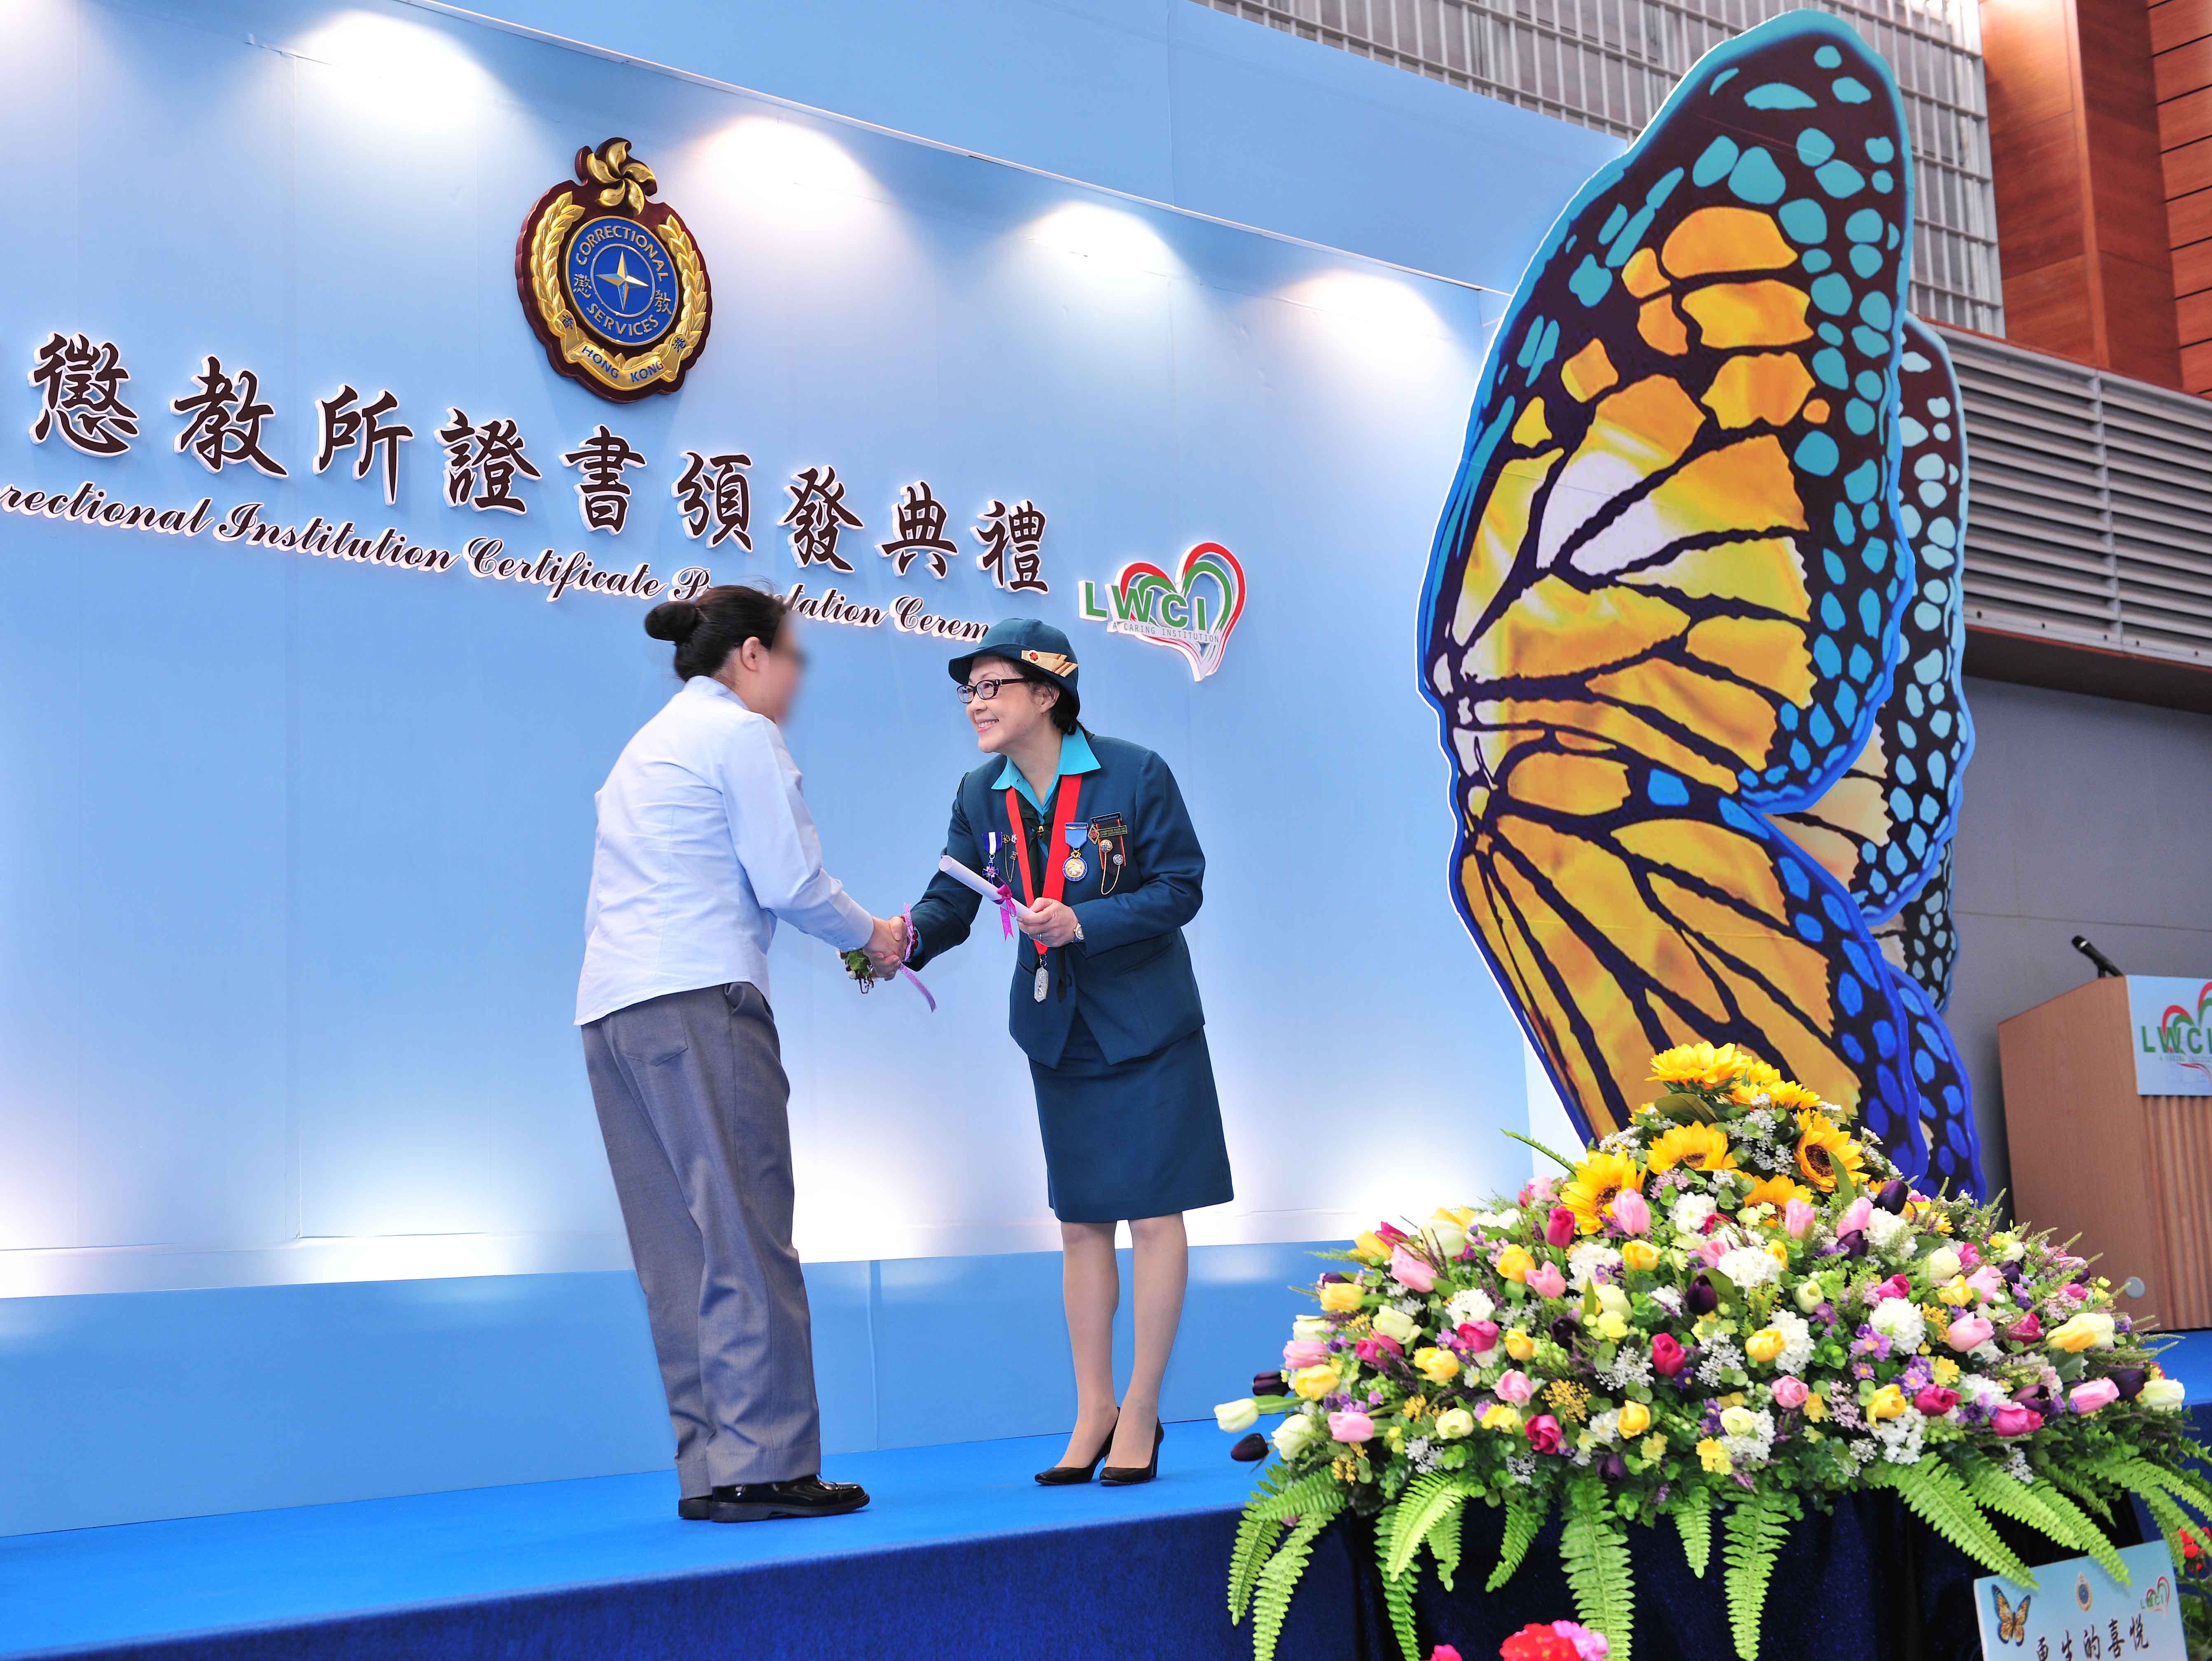 The Chief Commissioner of the Hong Kong Girl Guides Association, Mrs Josephine Pang, presents an academic certificate to an inmate representative at the presentation ceremony held in Lo Wu Correctional Institution today (March 6).